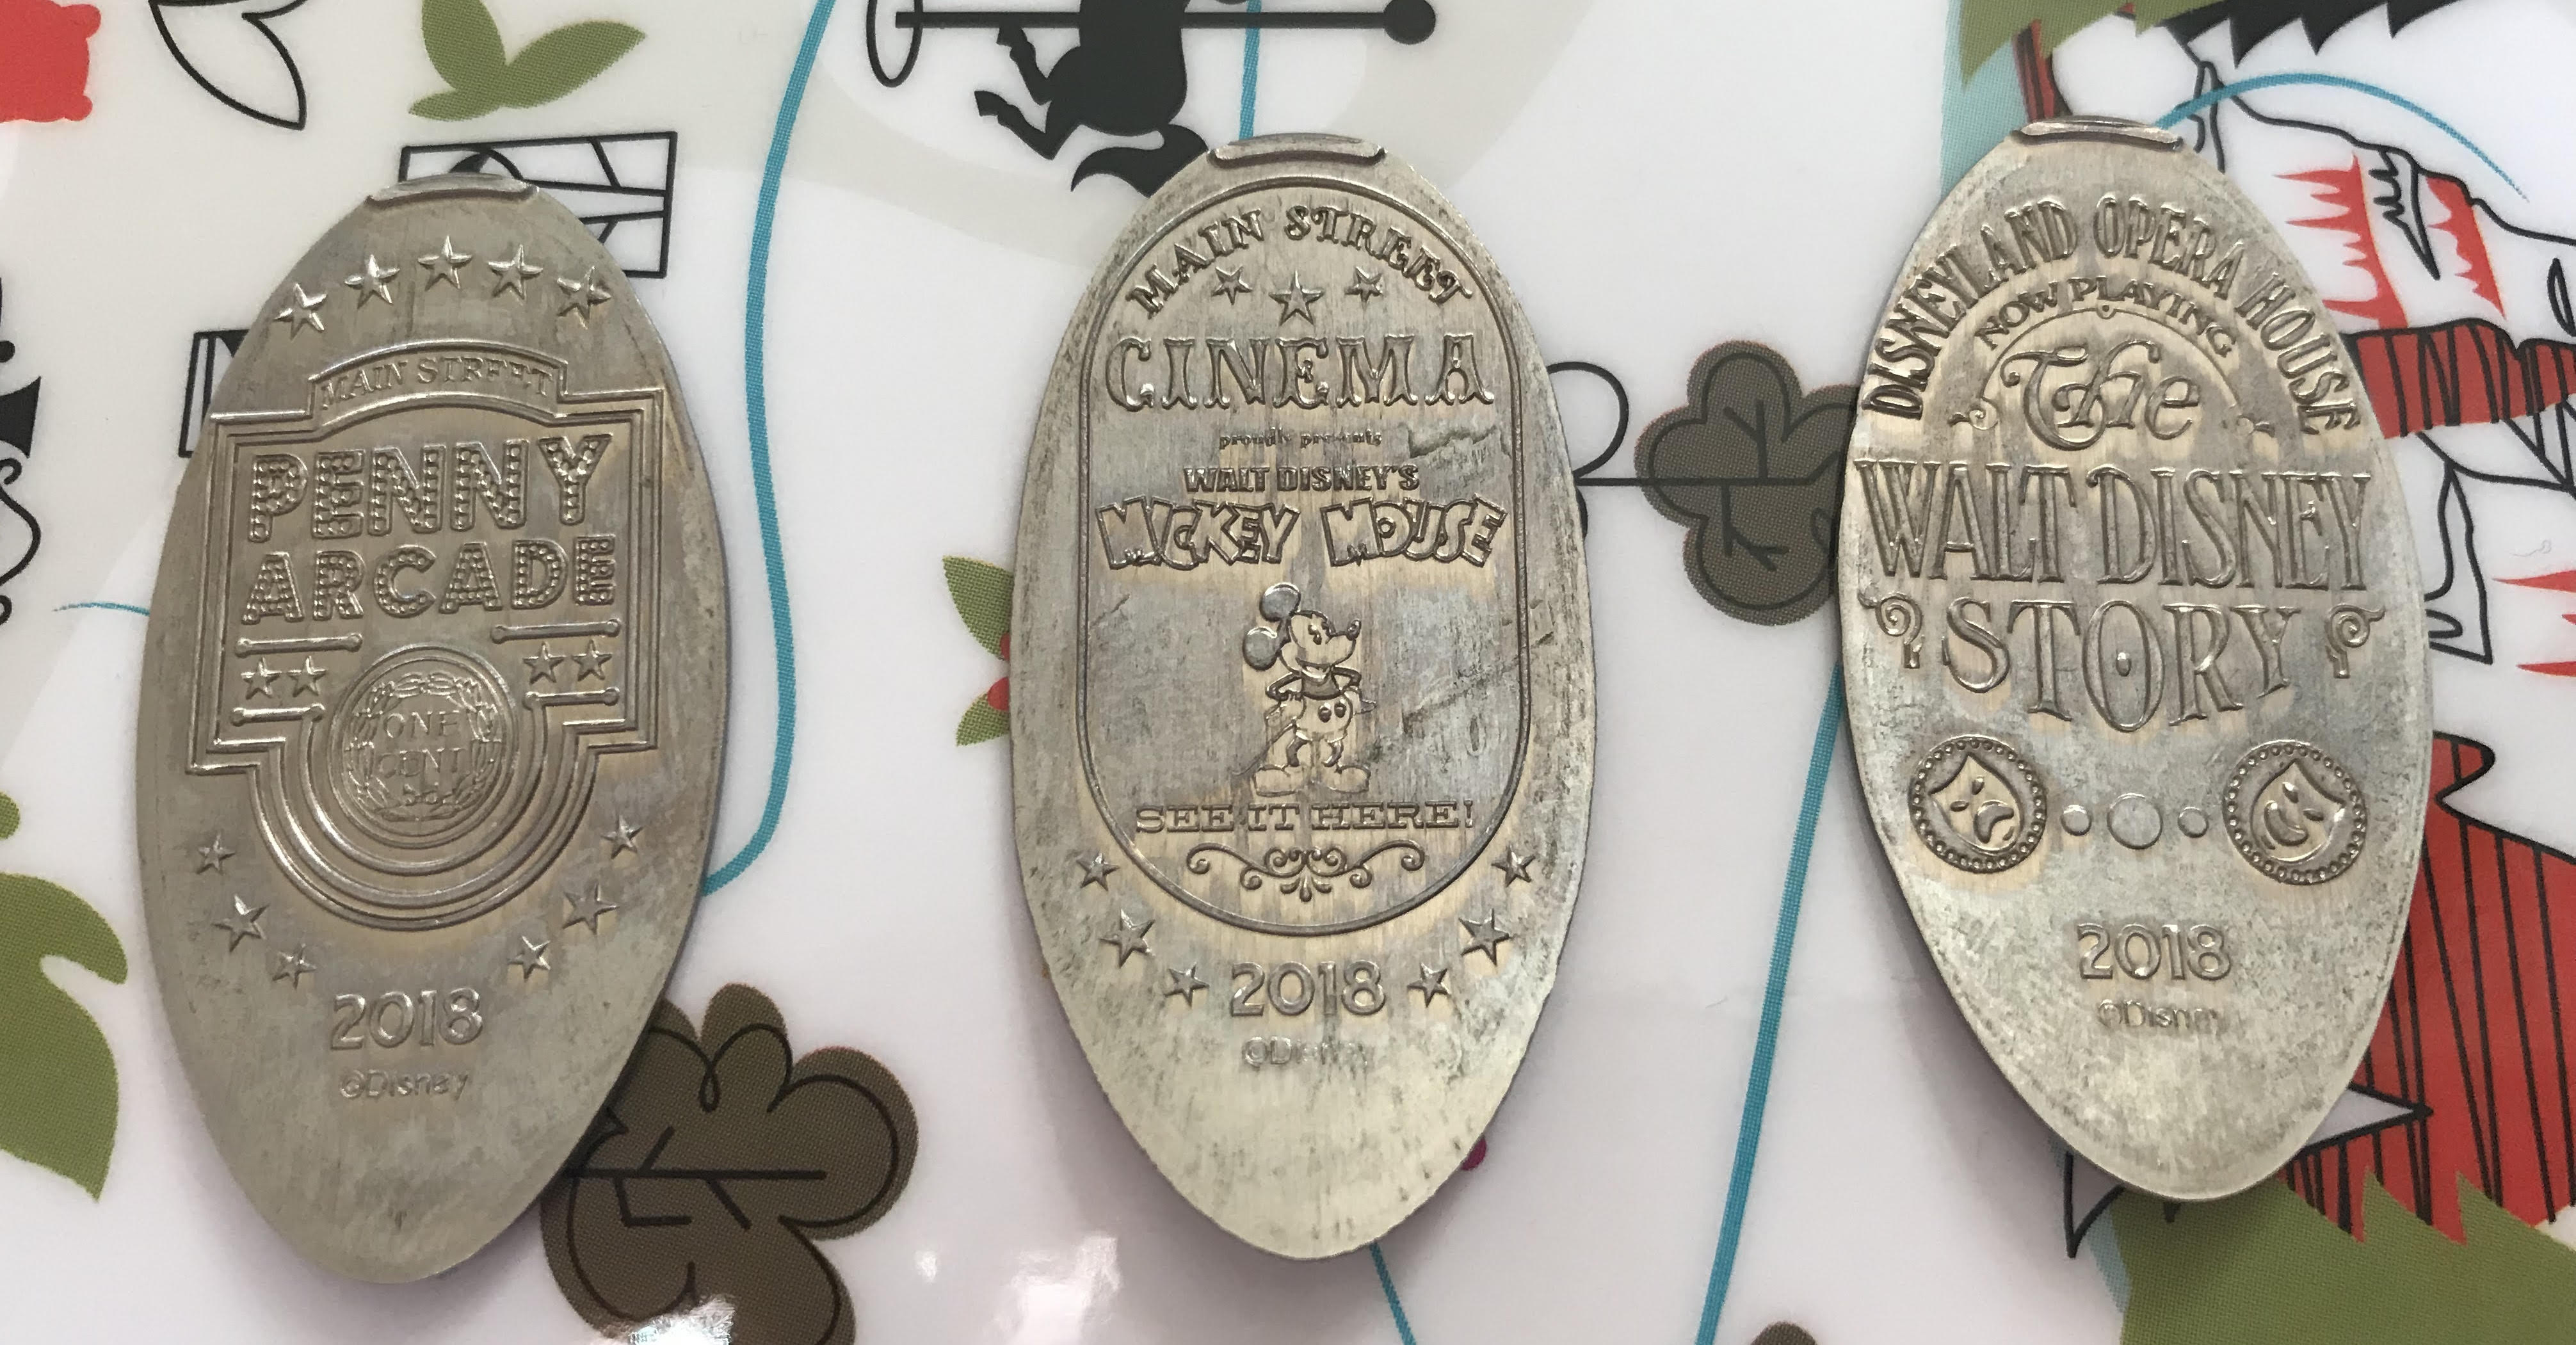 SATURDAY SIX: A Look at DISNEYLAND Pressed Coins (and why they are